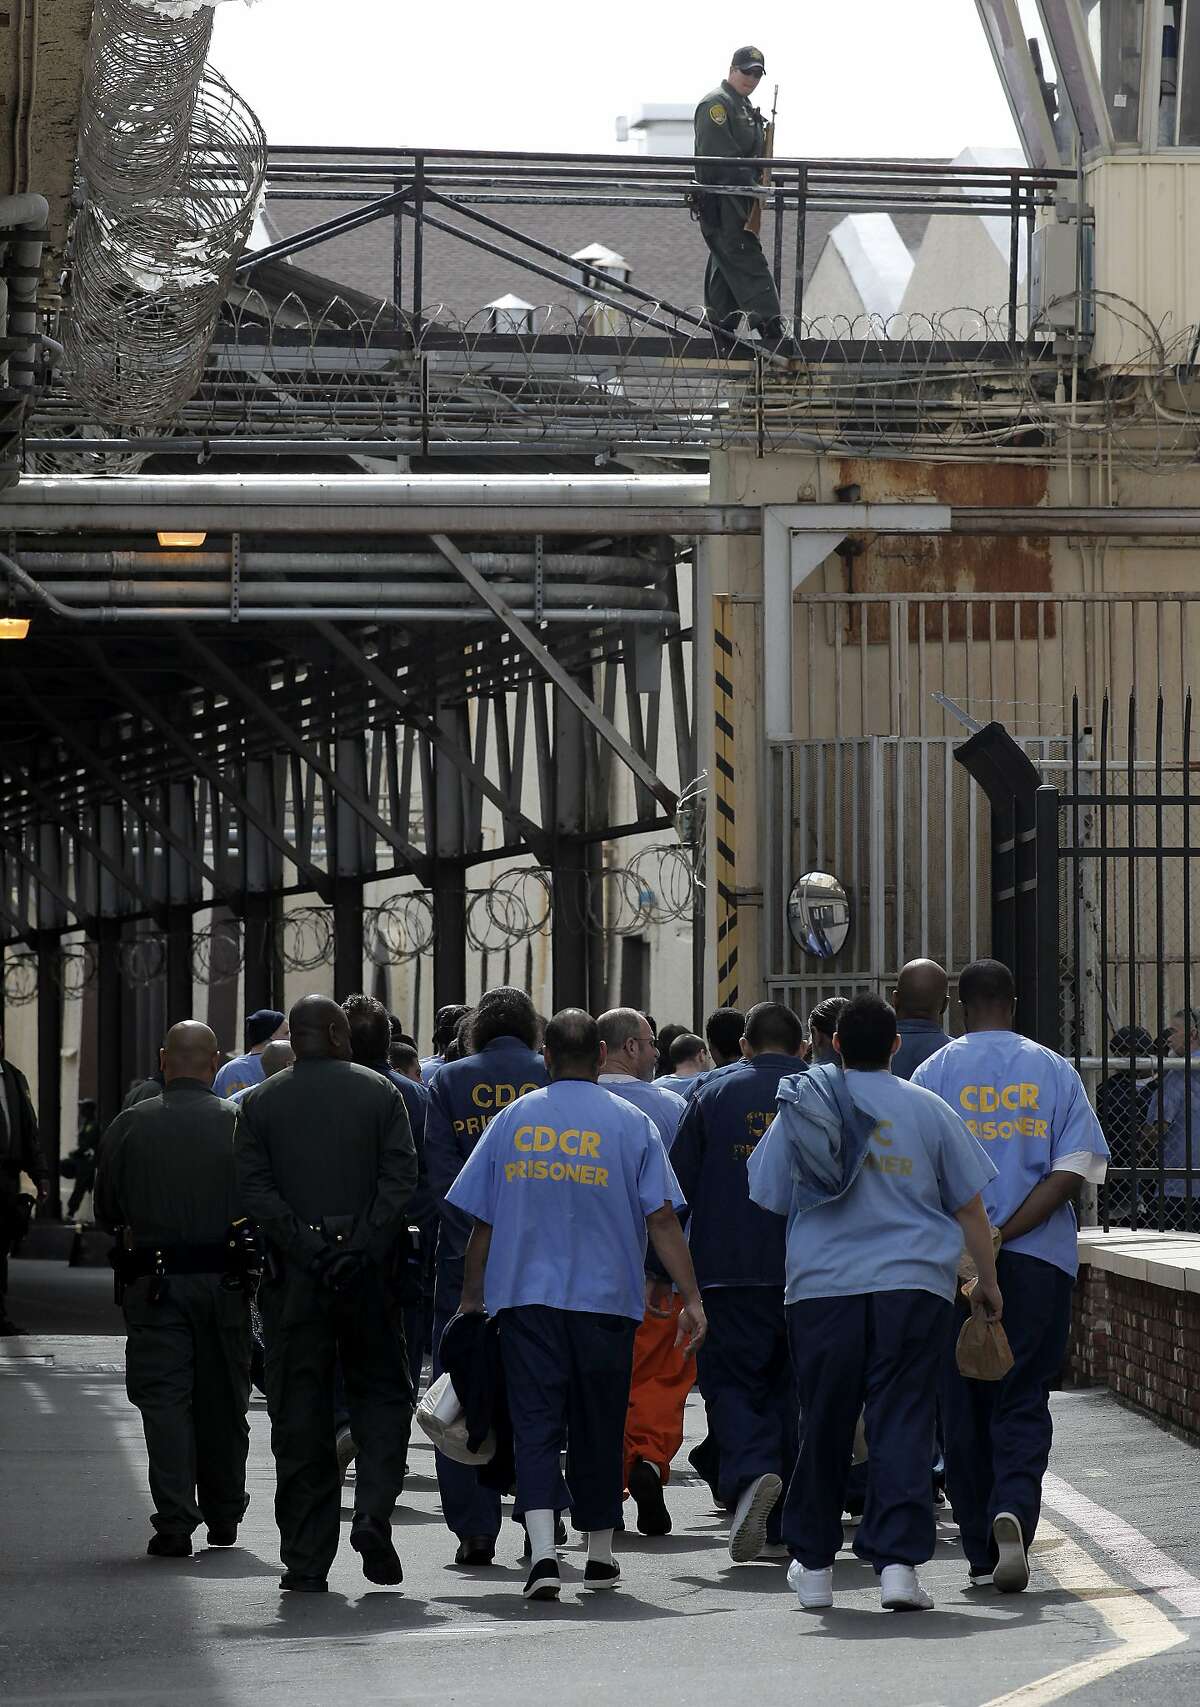 Corrections officers, lead prisoners back to their housing inside San Quentin State Prison, on Friday Mar. 4, 2011, in San Quentin, Calif. California state prison guards and their supervisors, have racked up an astounding 33 million hours of vacation, sick and other paid time off, which could amount to as much as a $1 billion liability for the state. A Senate report warned, a year ago, that mandatory furloughs at a 24-7 agency, would lead to such future burdens.